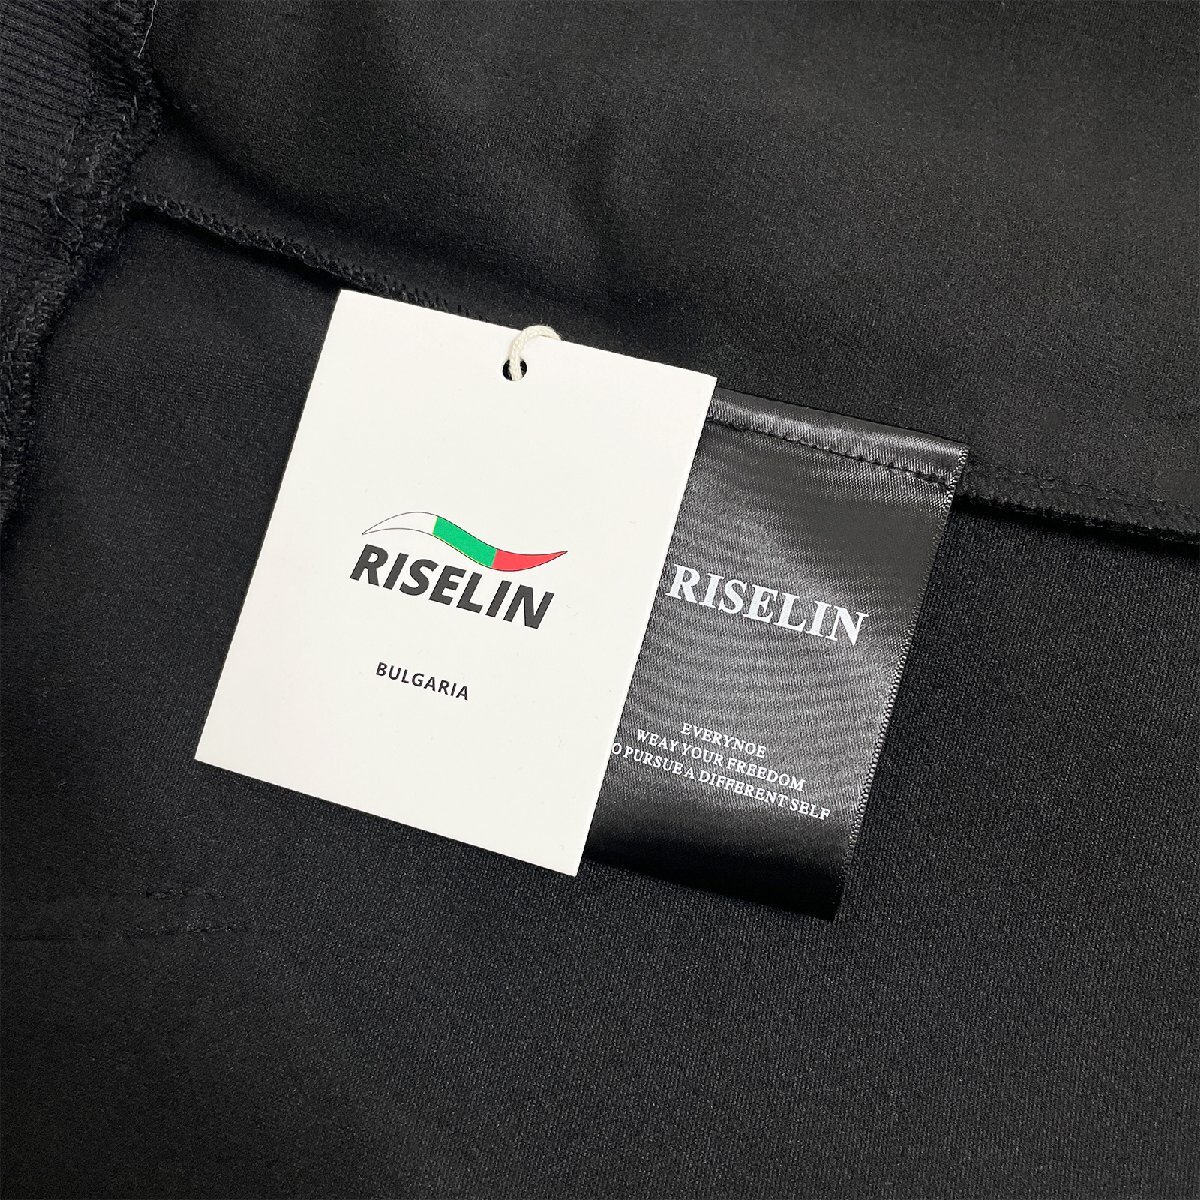  piece . Europe made * regular price 4 ten thousand * BVLGARY a departure *RISELIN Parker soft comfortable pull over tops simple Street usually put on 2XL/52